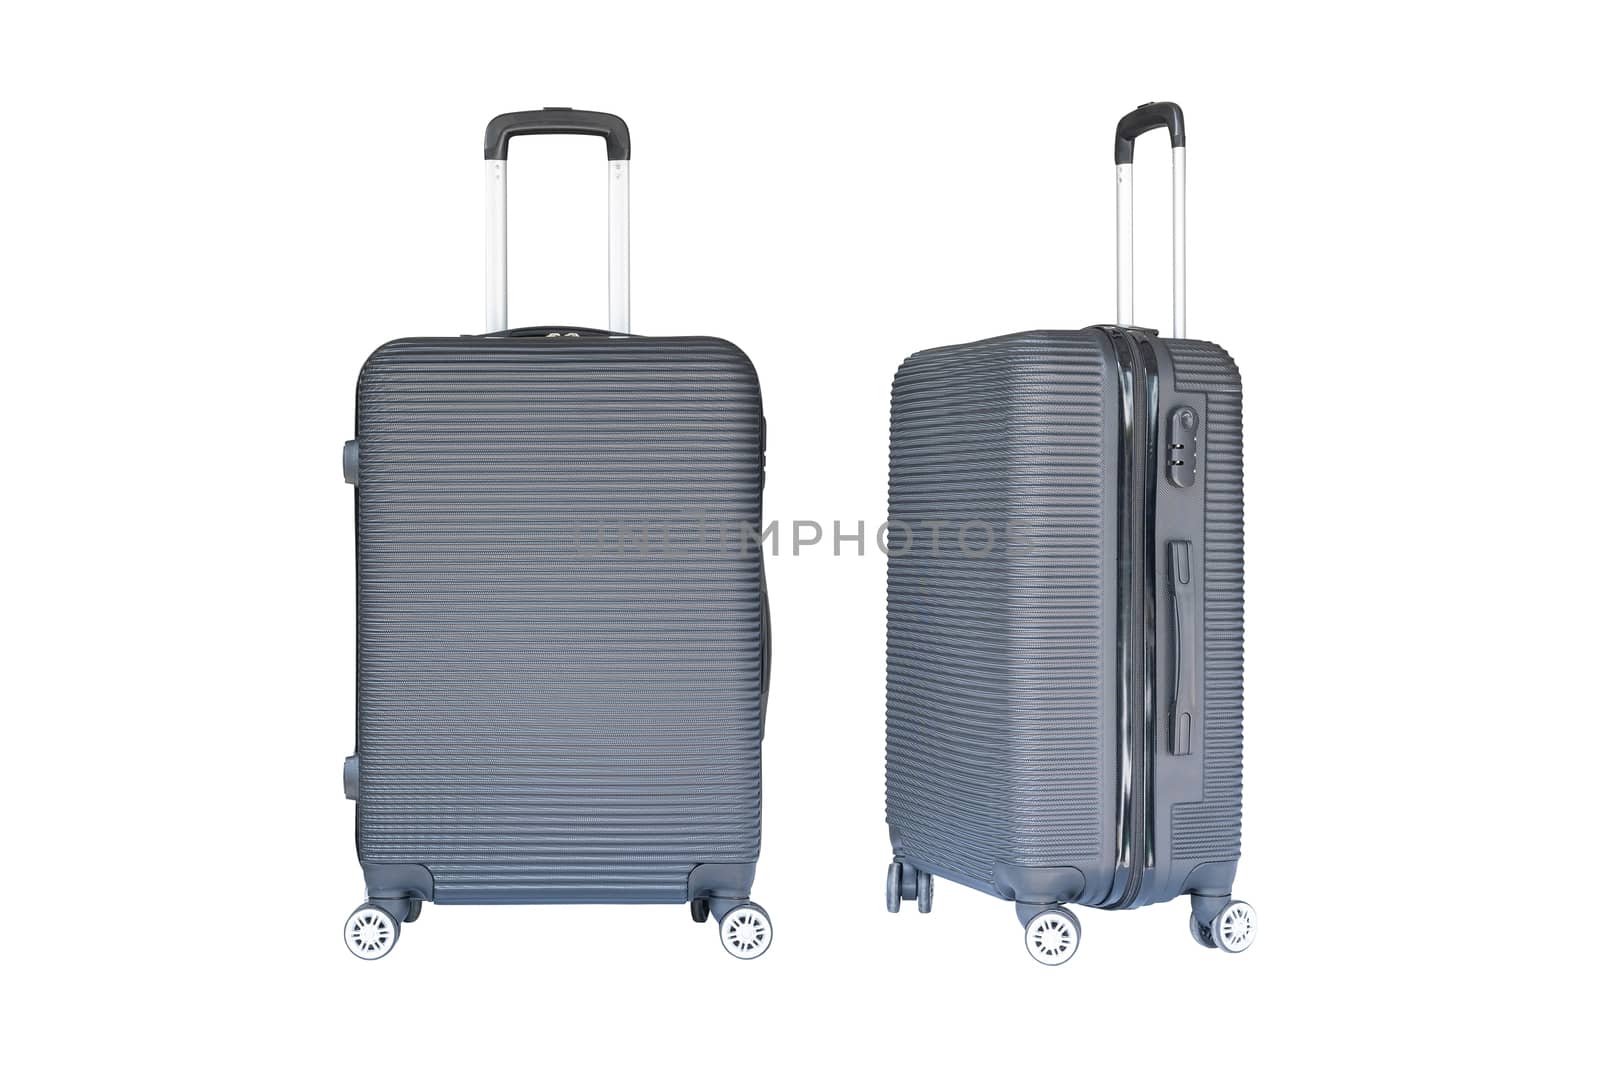 Beautiful gray color travel luggage front view and side view iso by wattanaphob